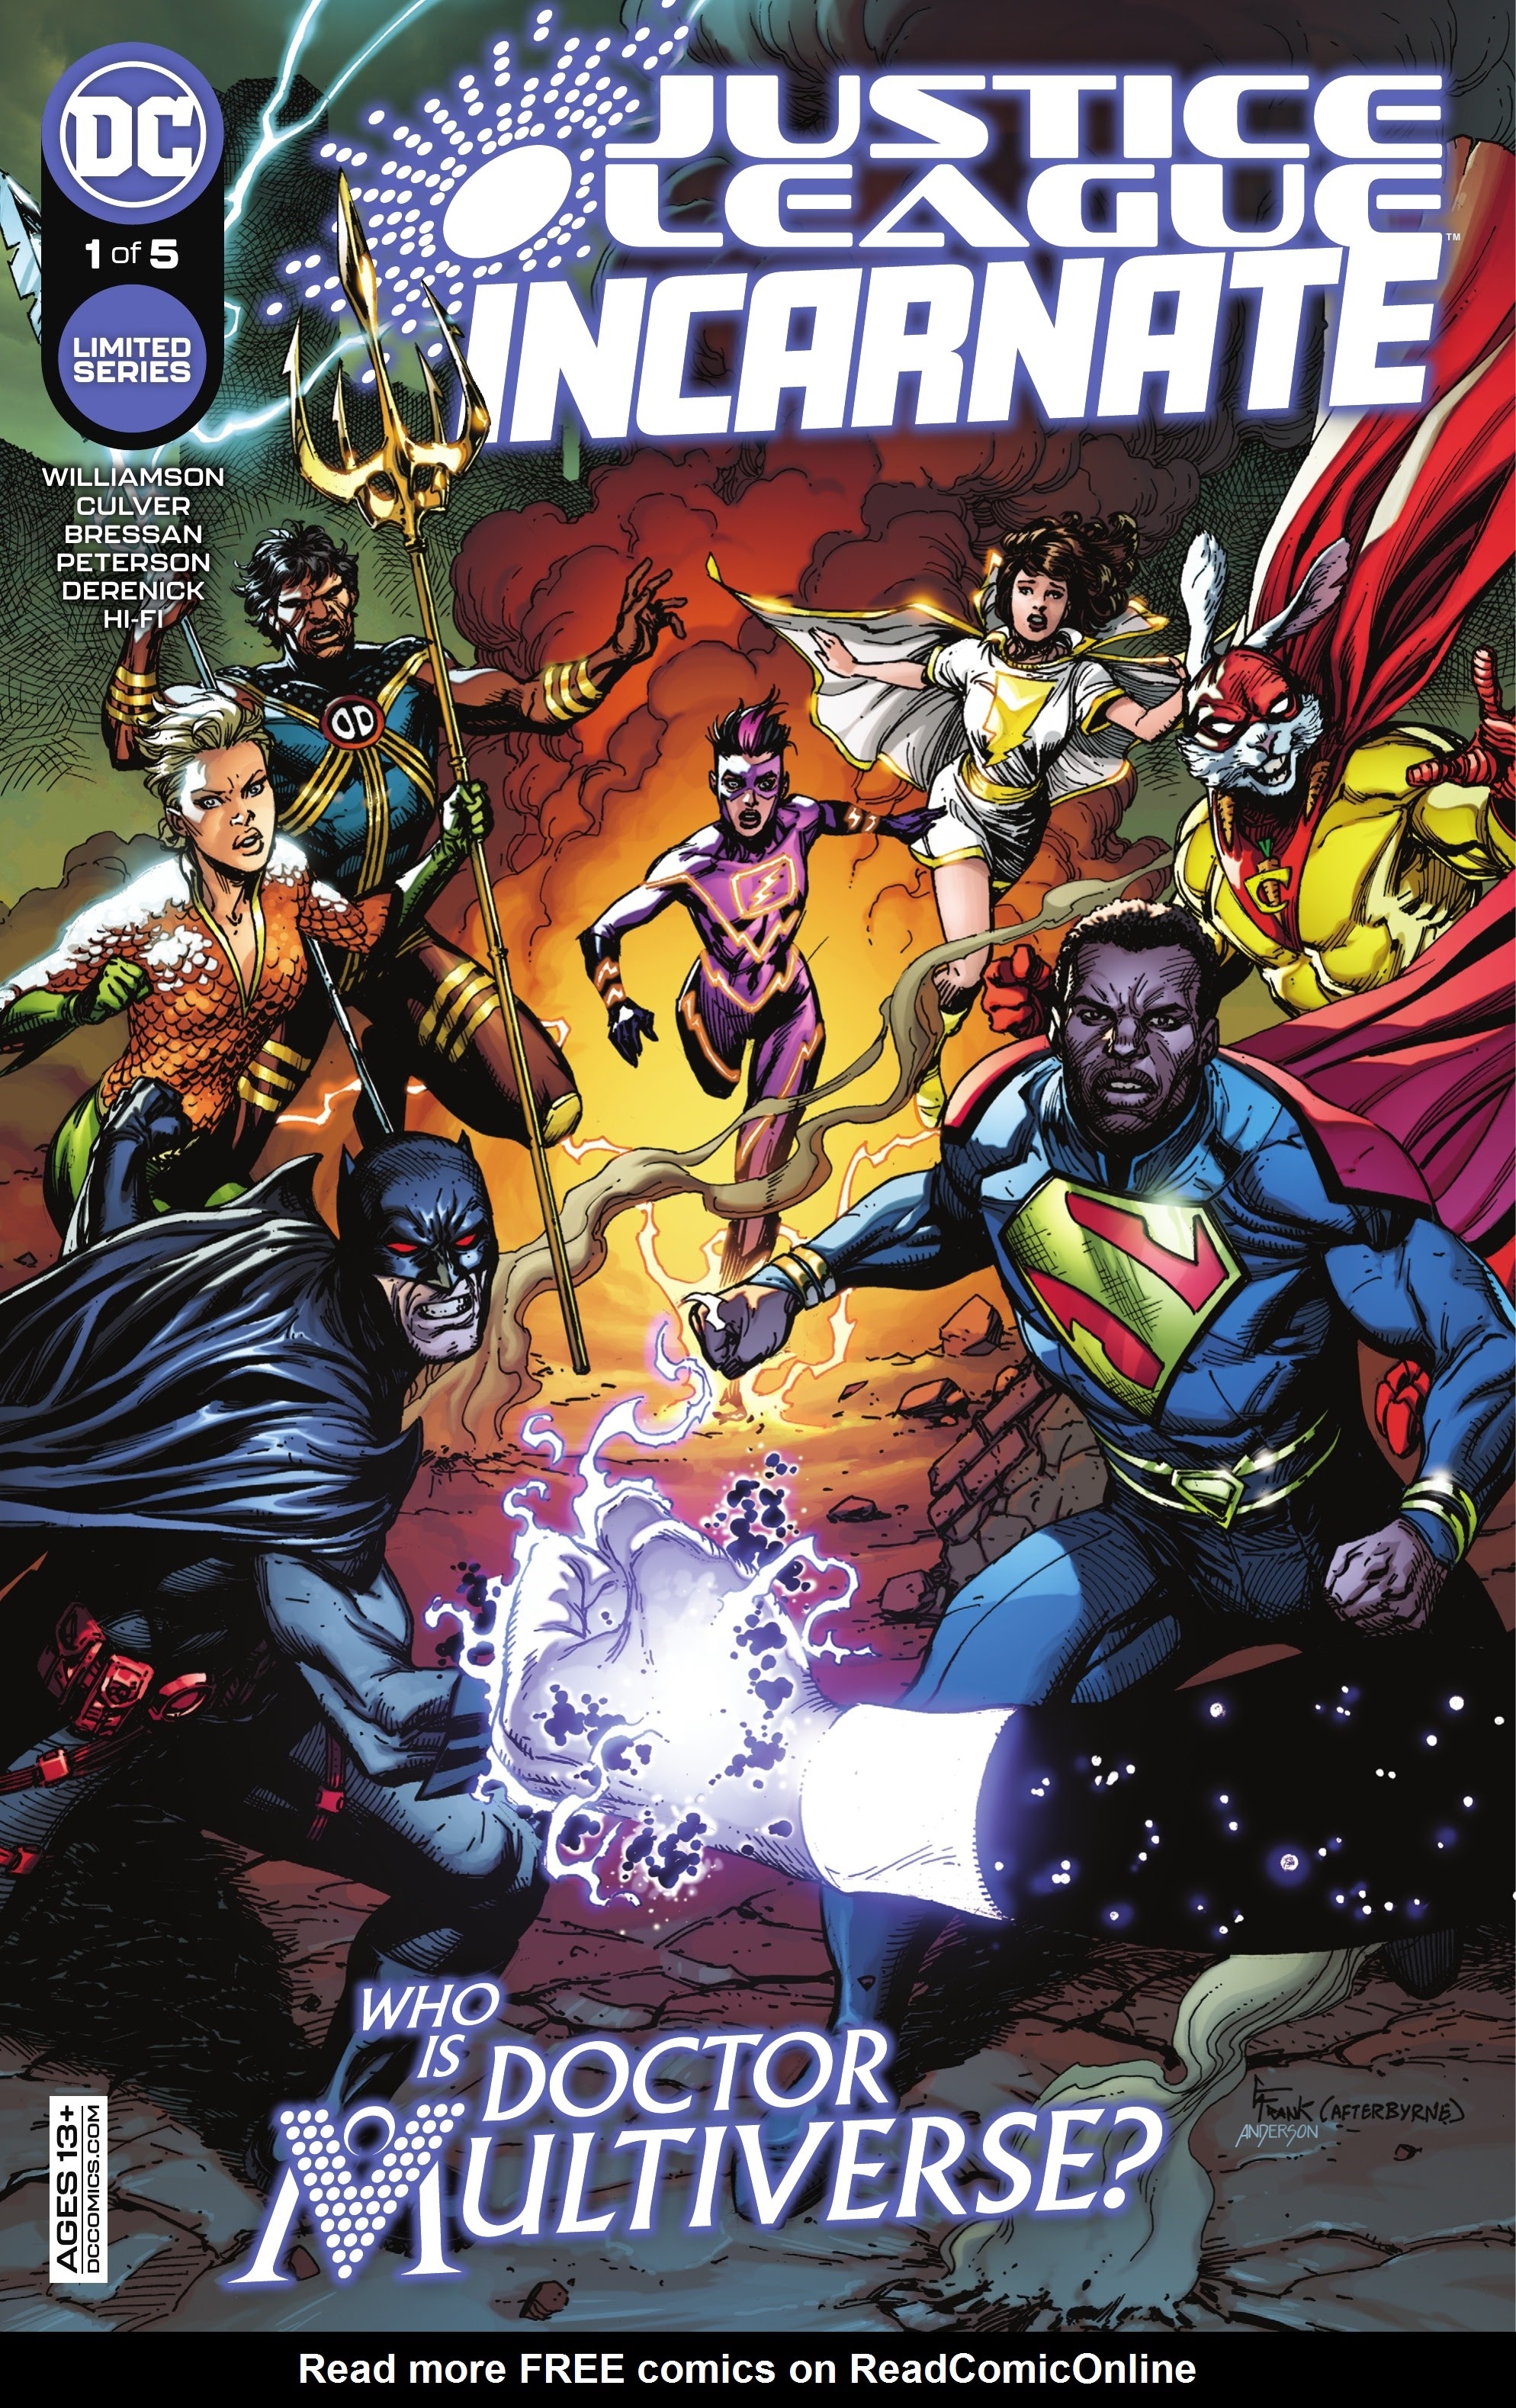 Read online Justice League Incarnate comic -  Issue #1 - 1